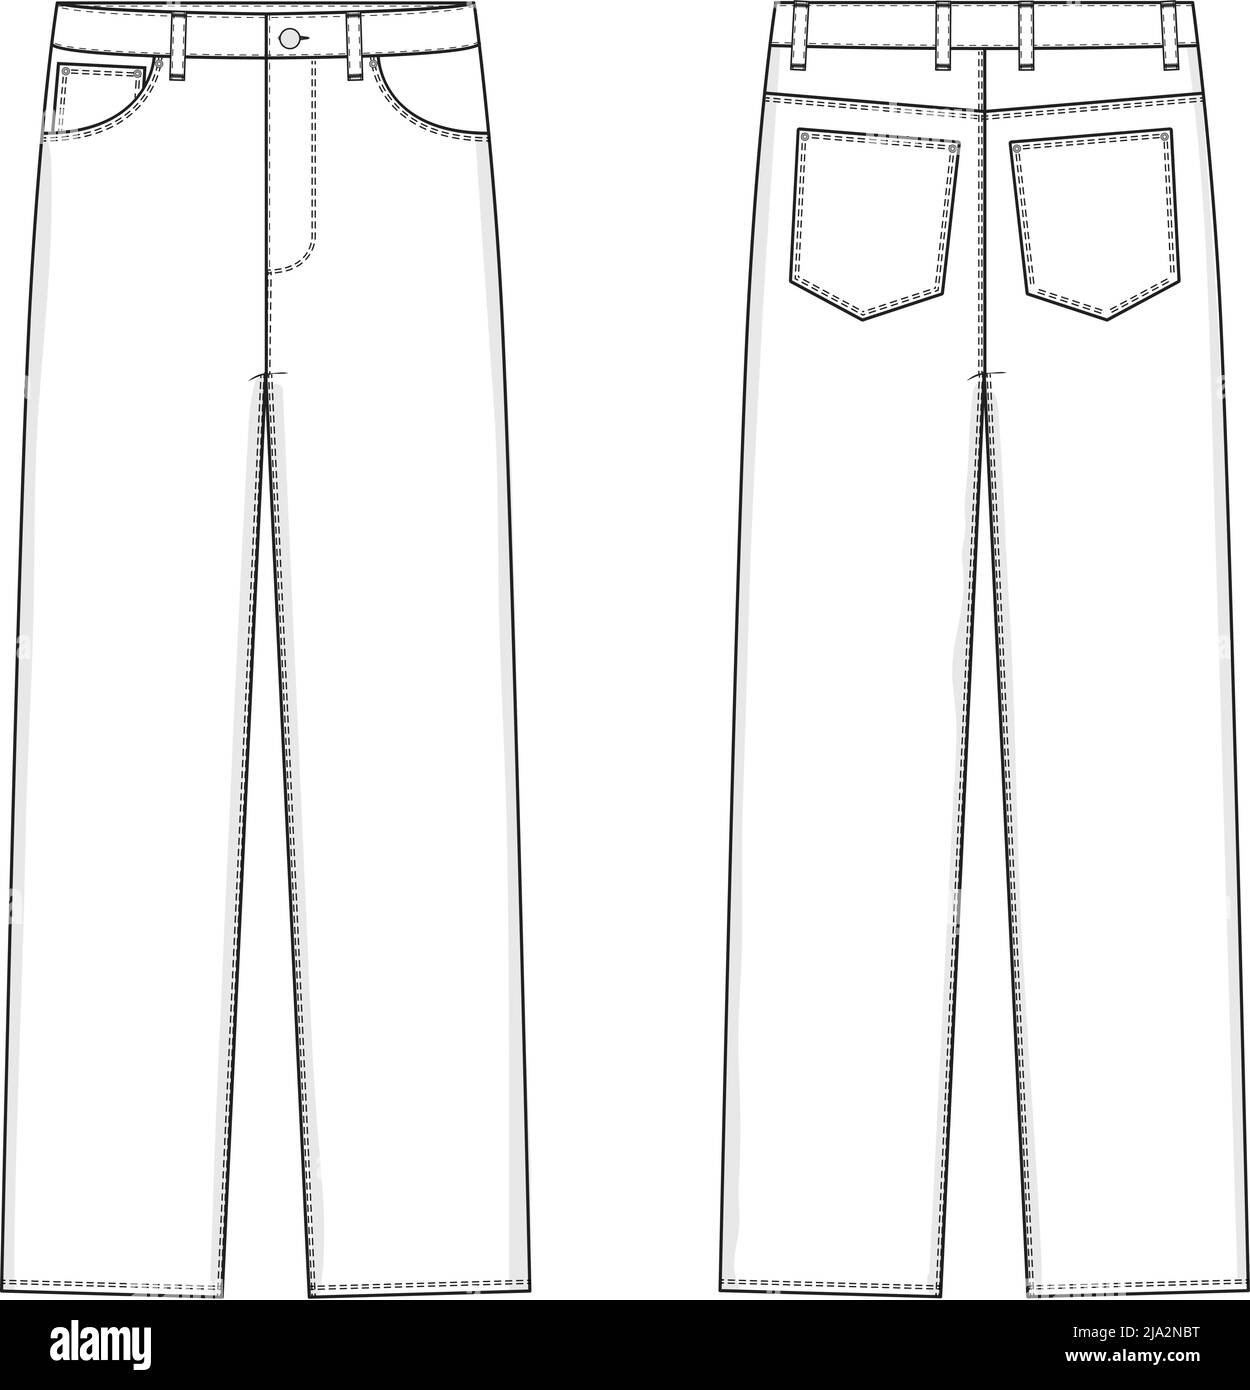 Straight Leg Jeans Flat Technical Drawing Illustration Five Pocket Classic Blank Streetwear Mock-up Template for Design and Tech Packs CAD. Stock Vector